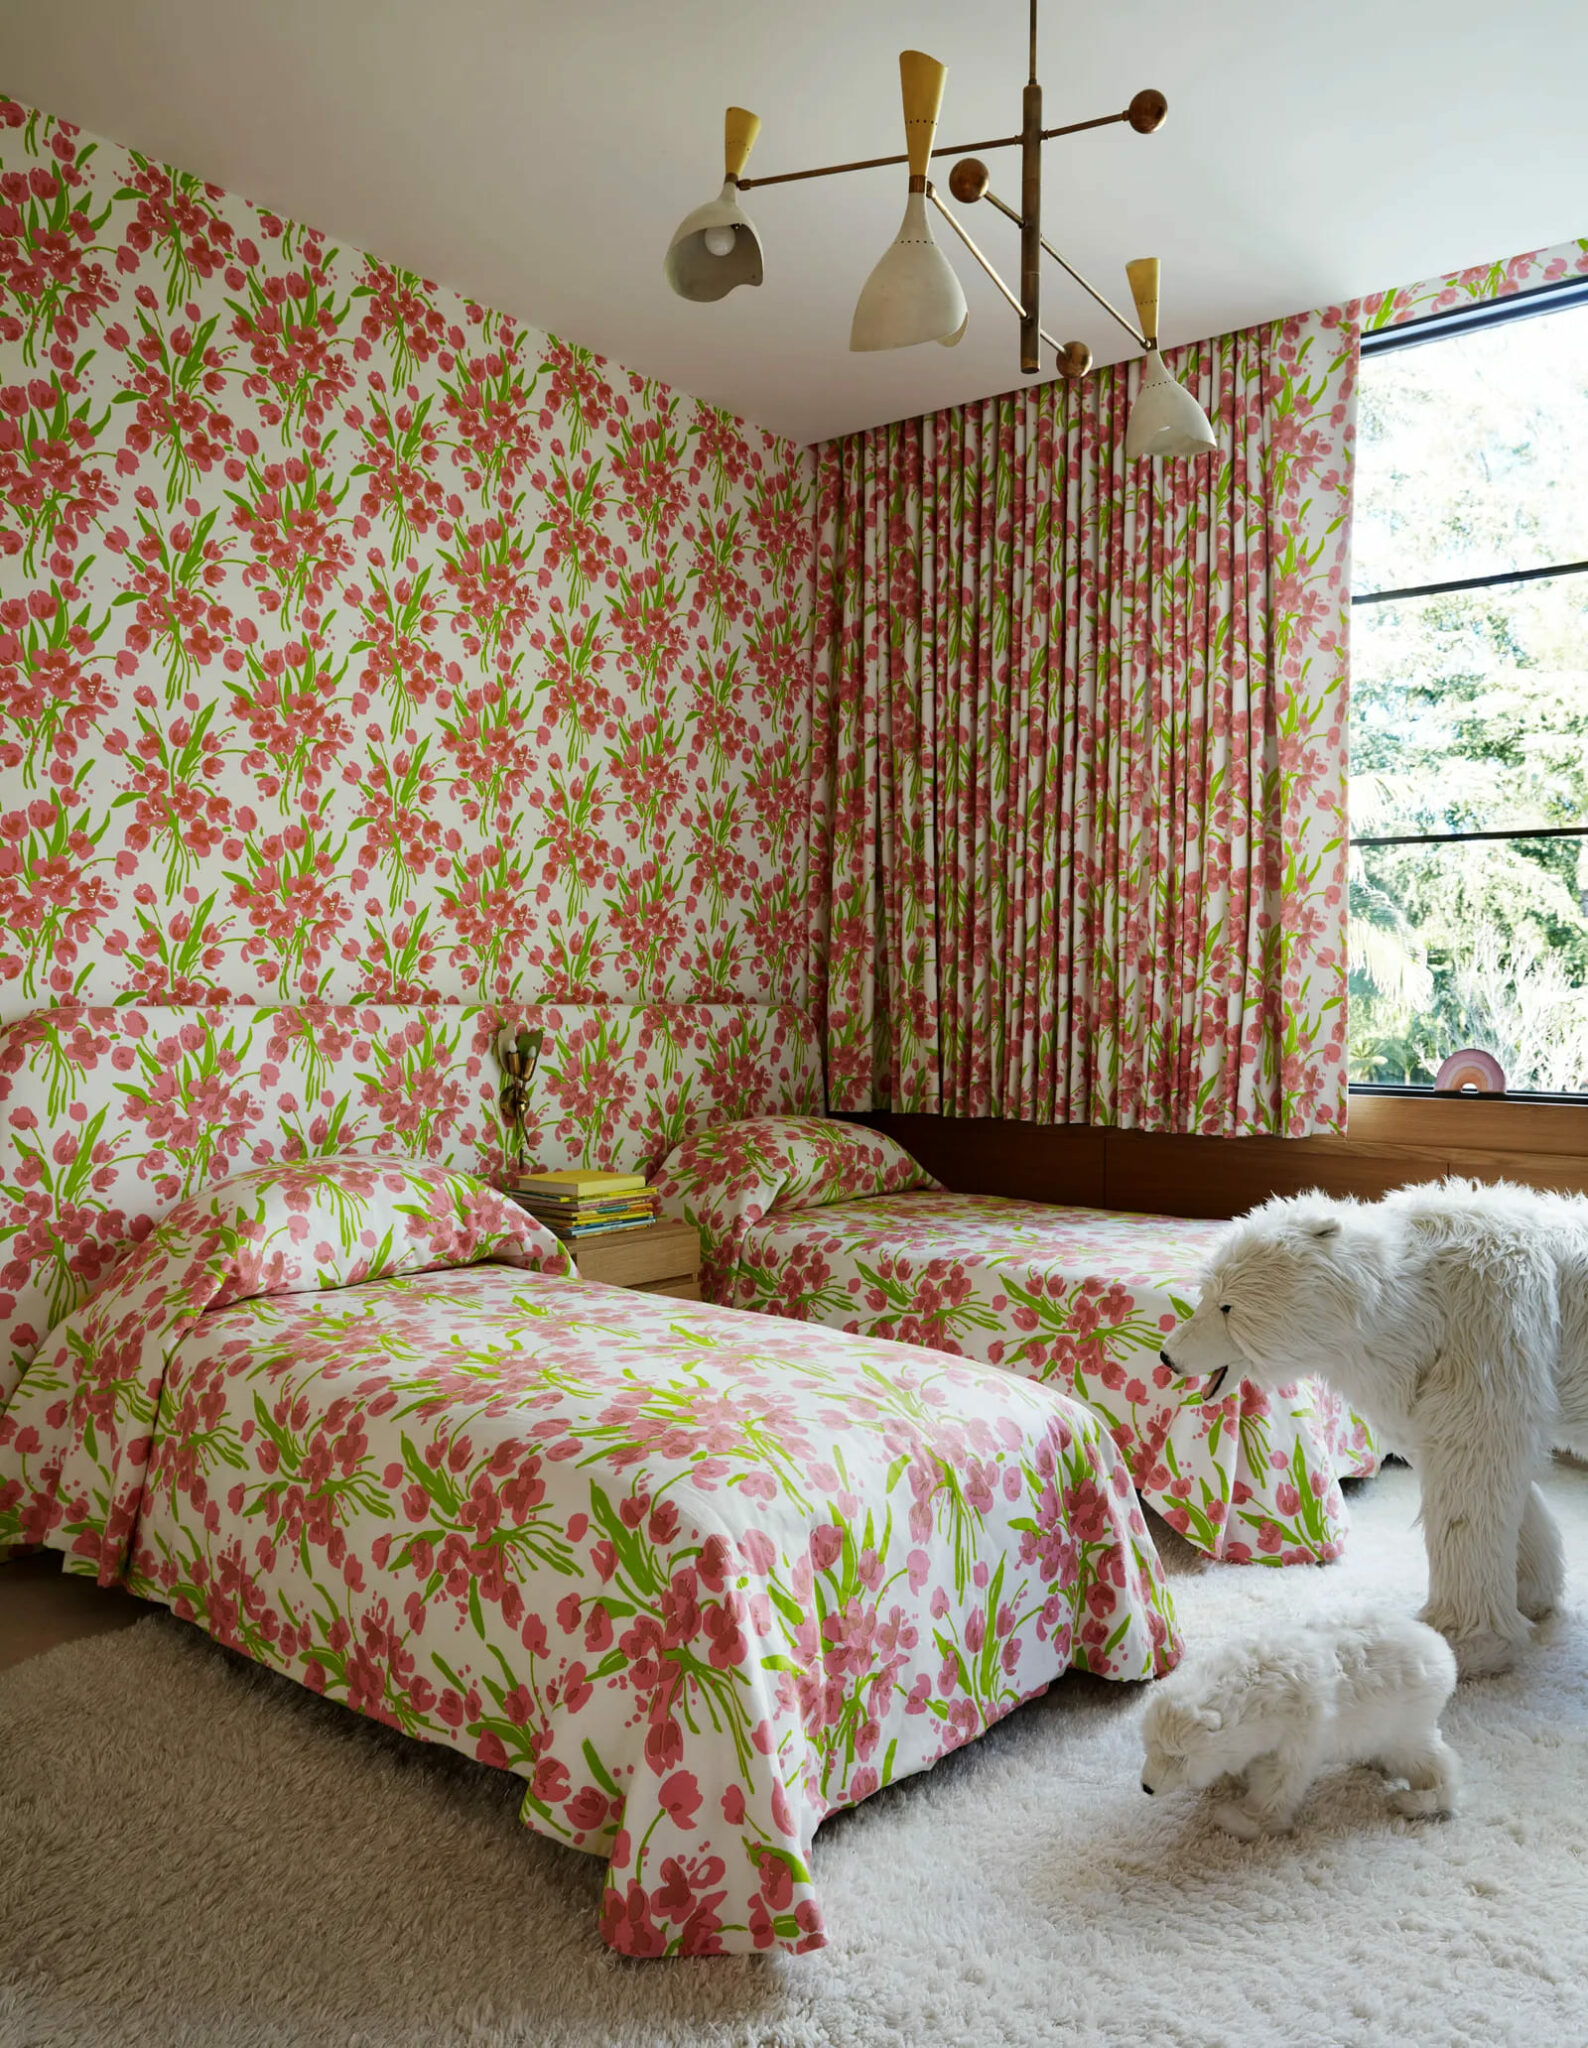 Eclectic children's bedroom in a bold floral print